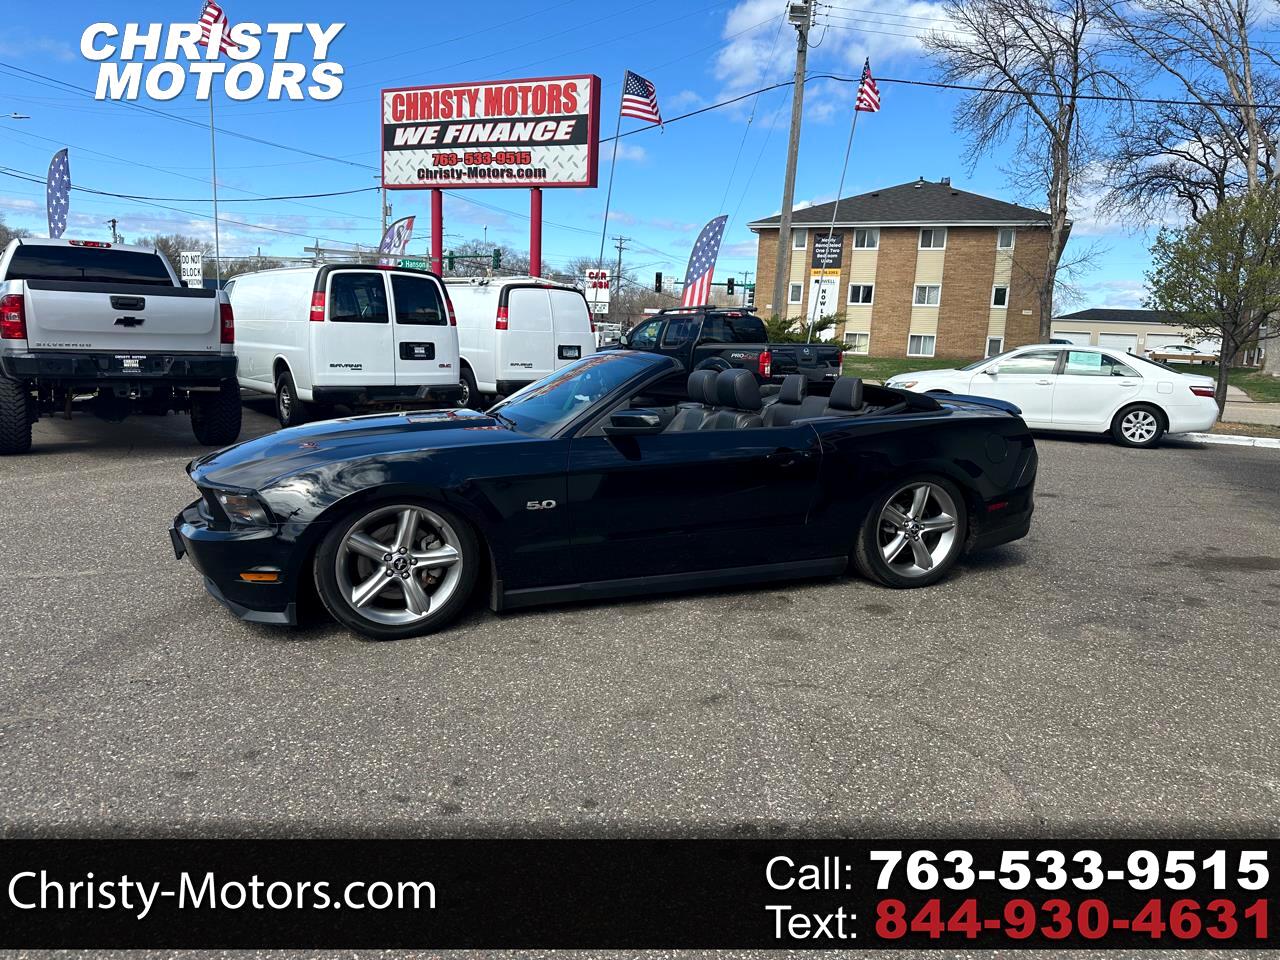 2011 Ford Mustang GT convertible